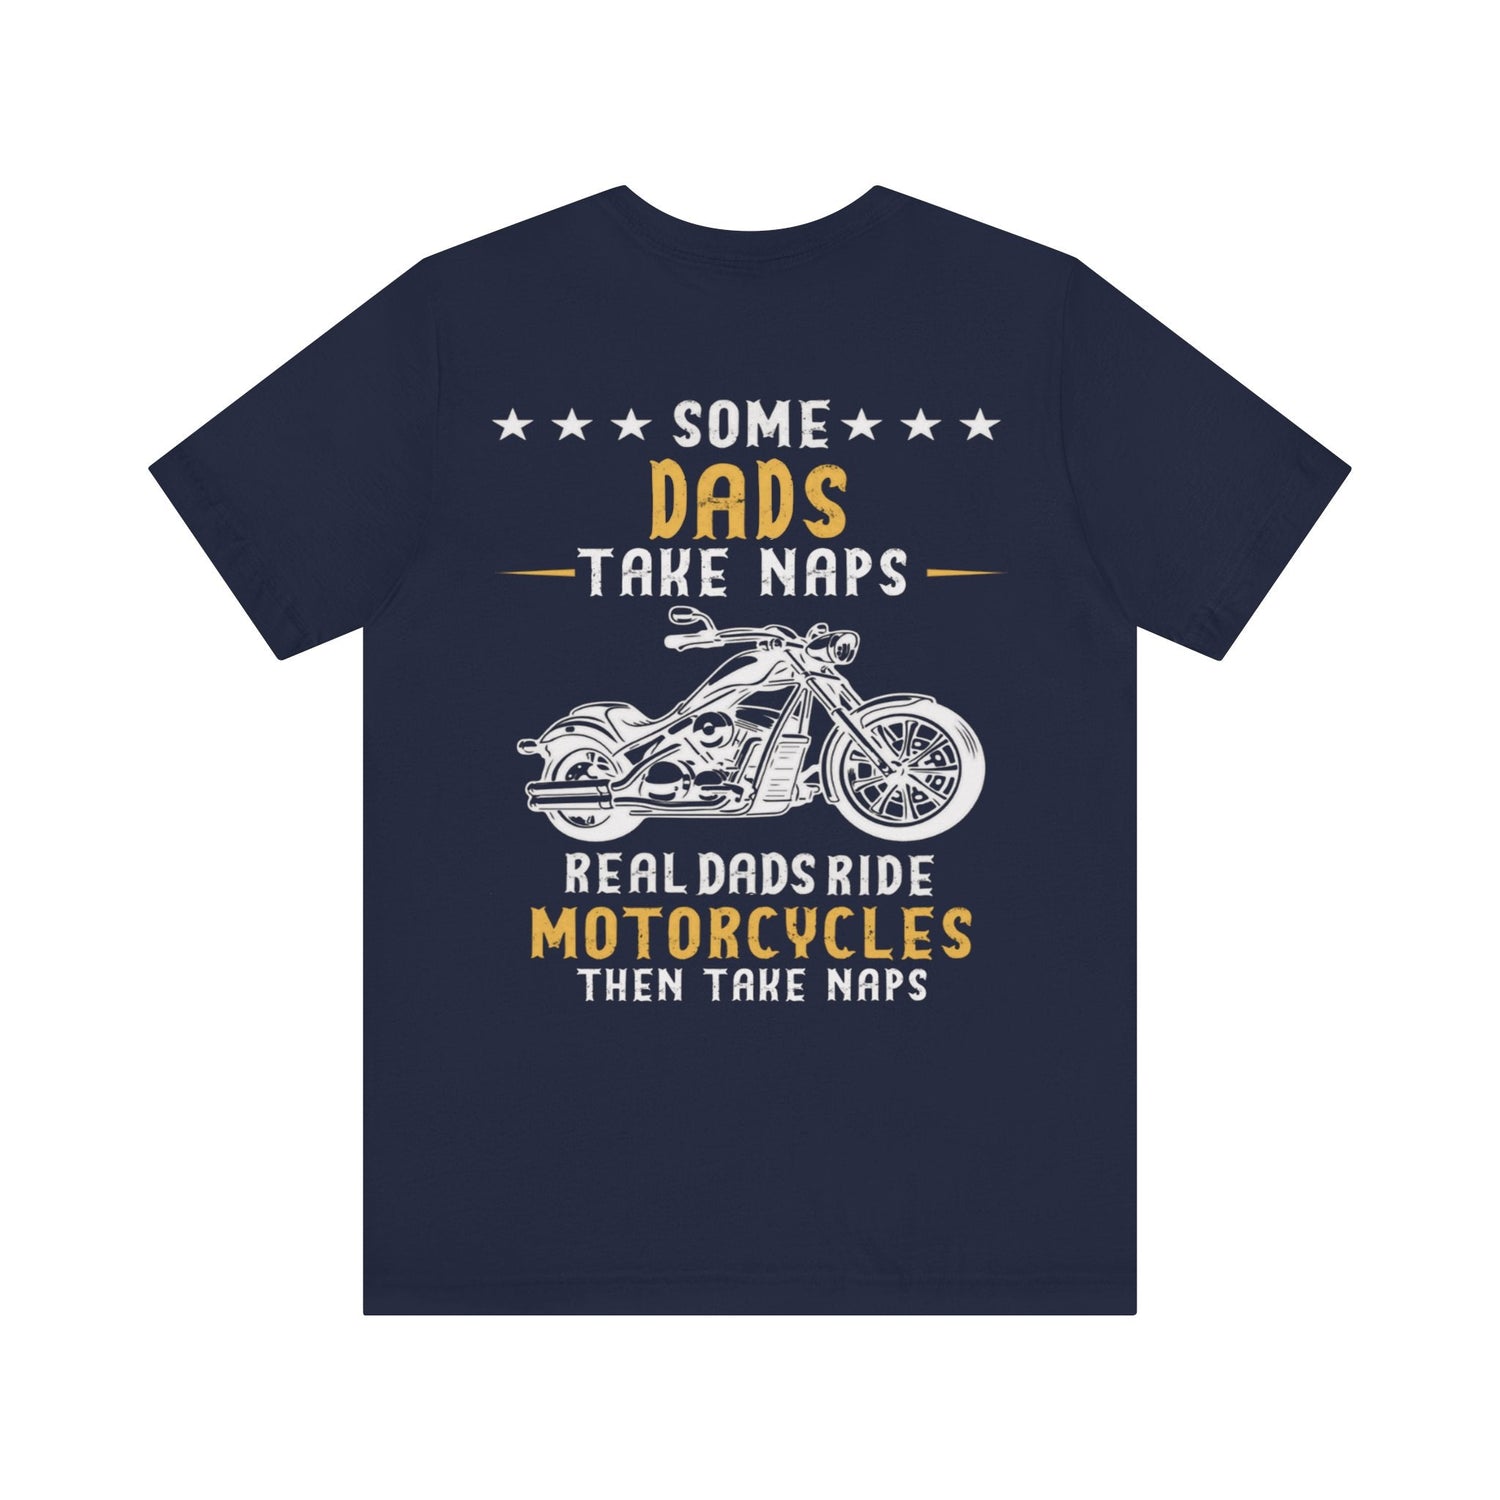 Kate McEnroe New York Biker Dad Shirt For Fathers day, Birthday Gift, Real Dads Ride Motorcycles Then Take Naps Shirt, Funny Biker Shirt, Dad GiftT - Shirt15815857657202461870